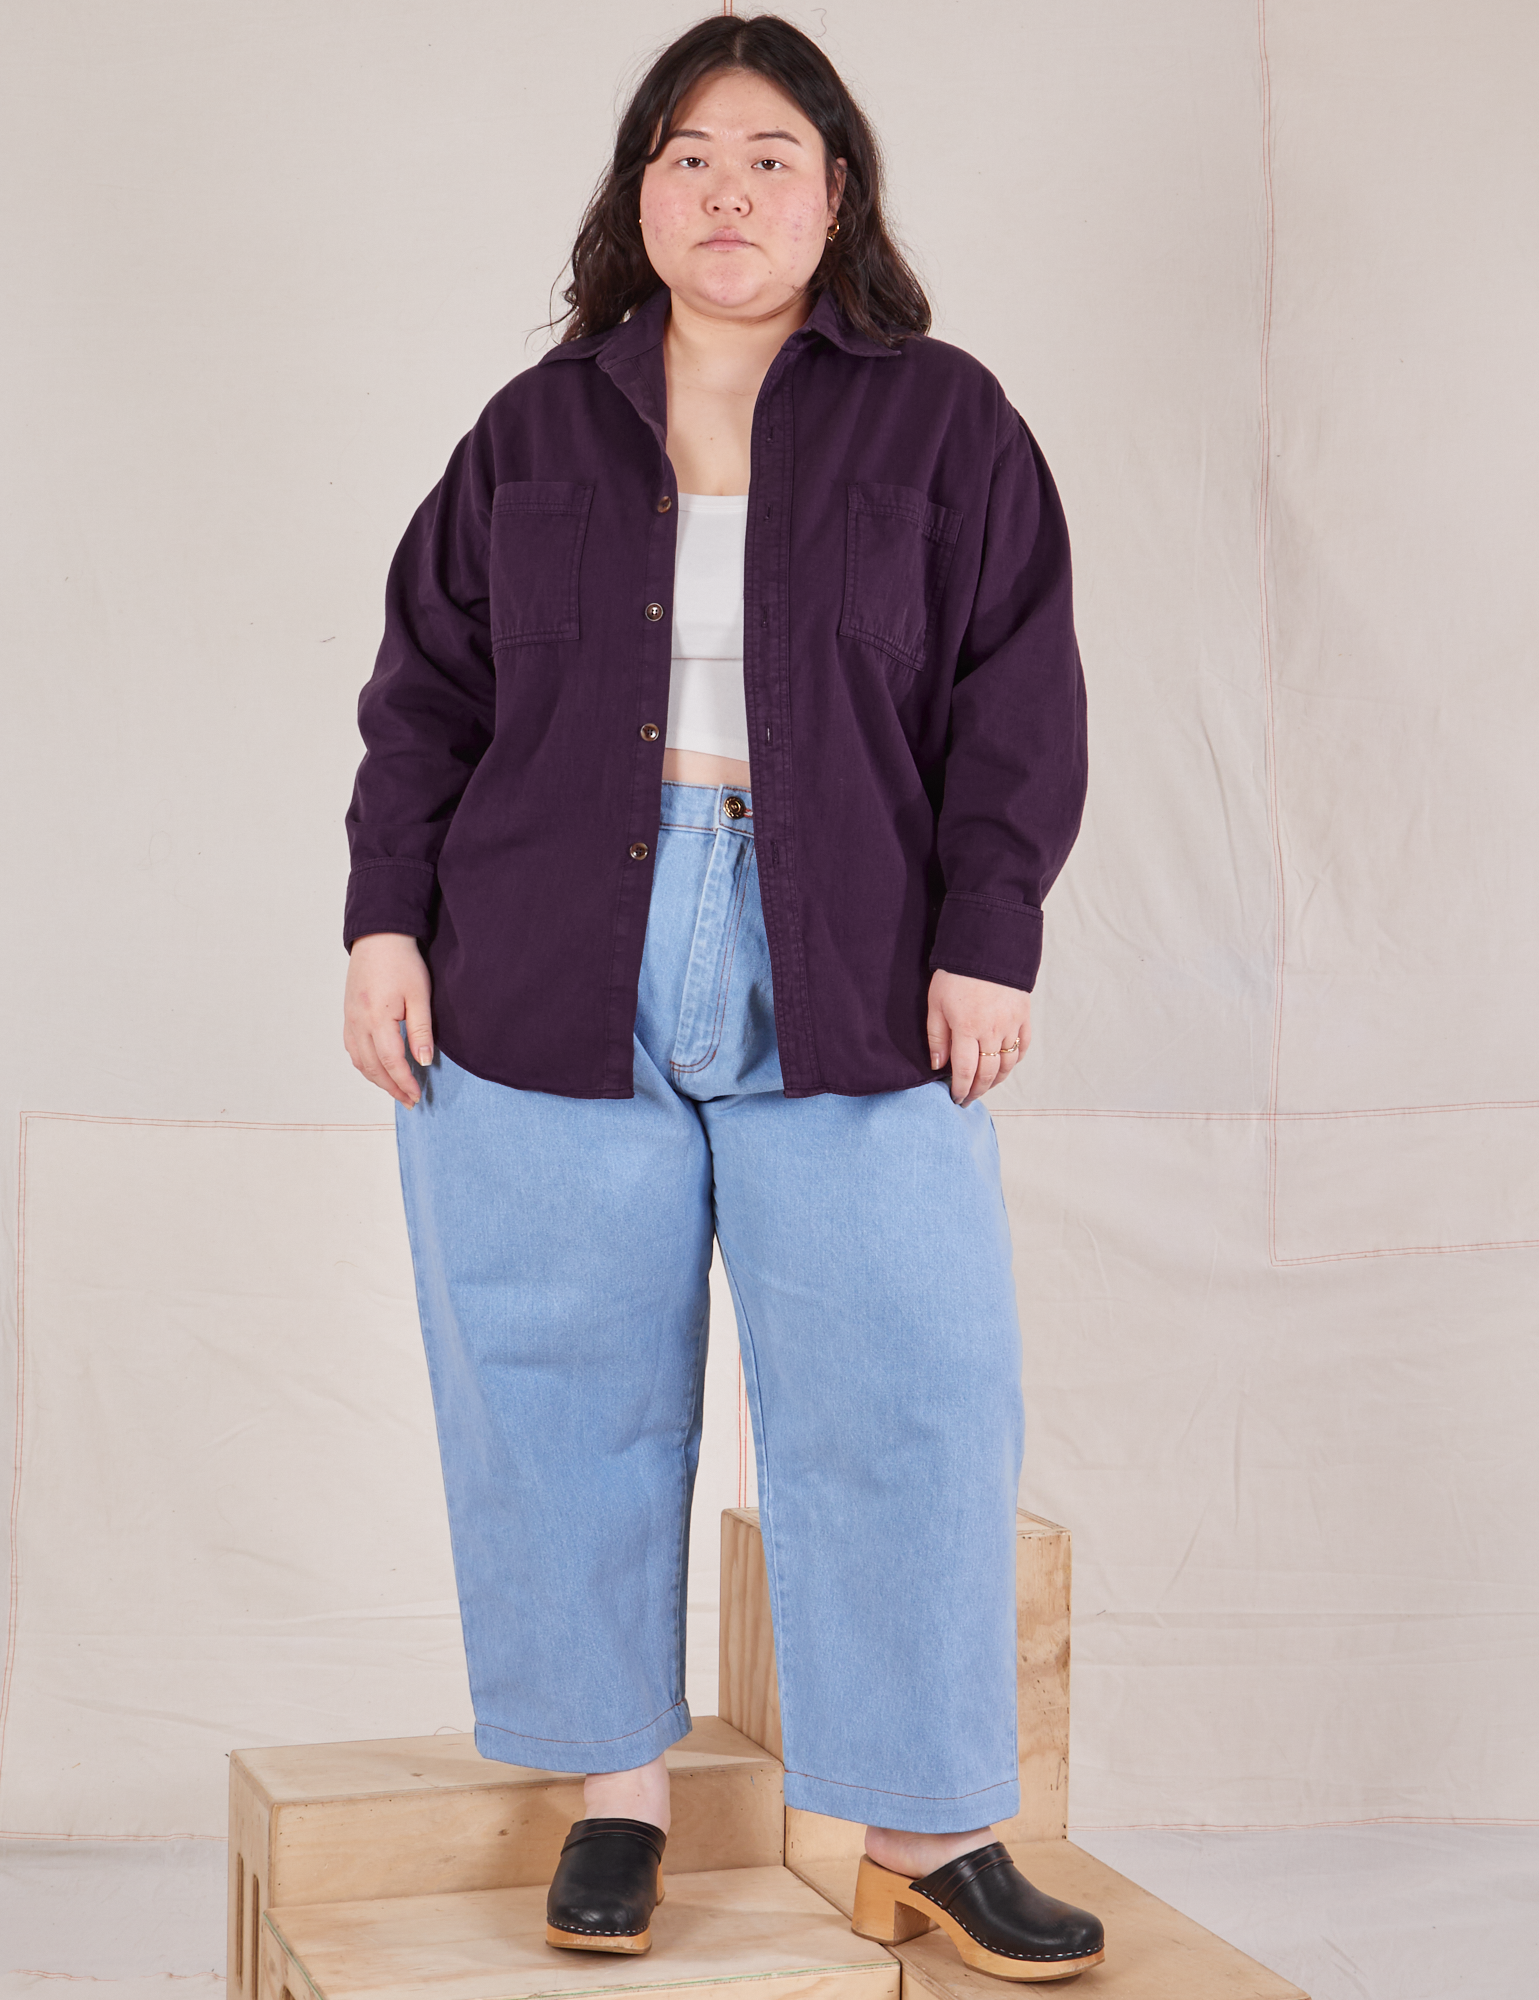 Ashley is wearing Oversize Overshirt in Nebula Purple and light wash Trouser Jeans